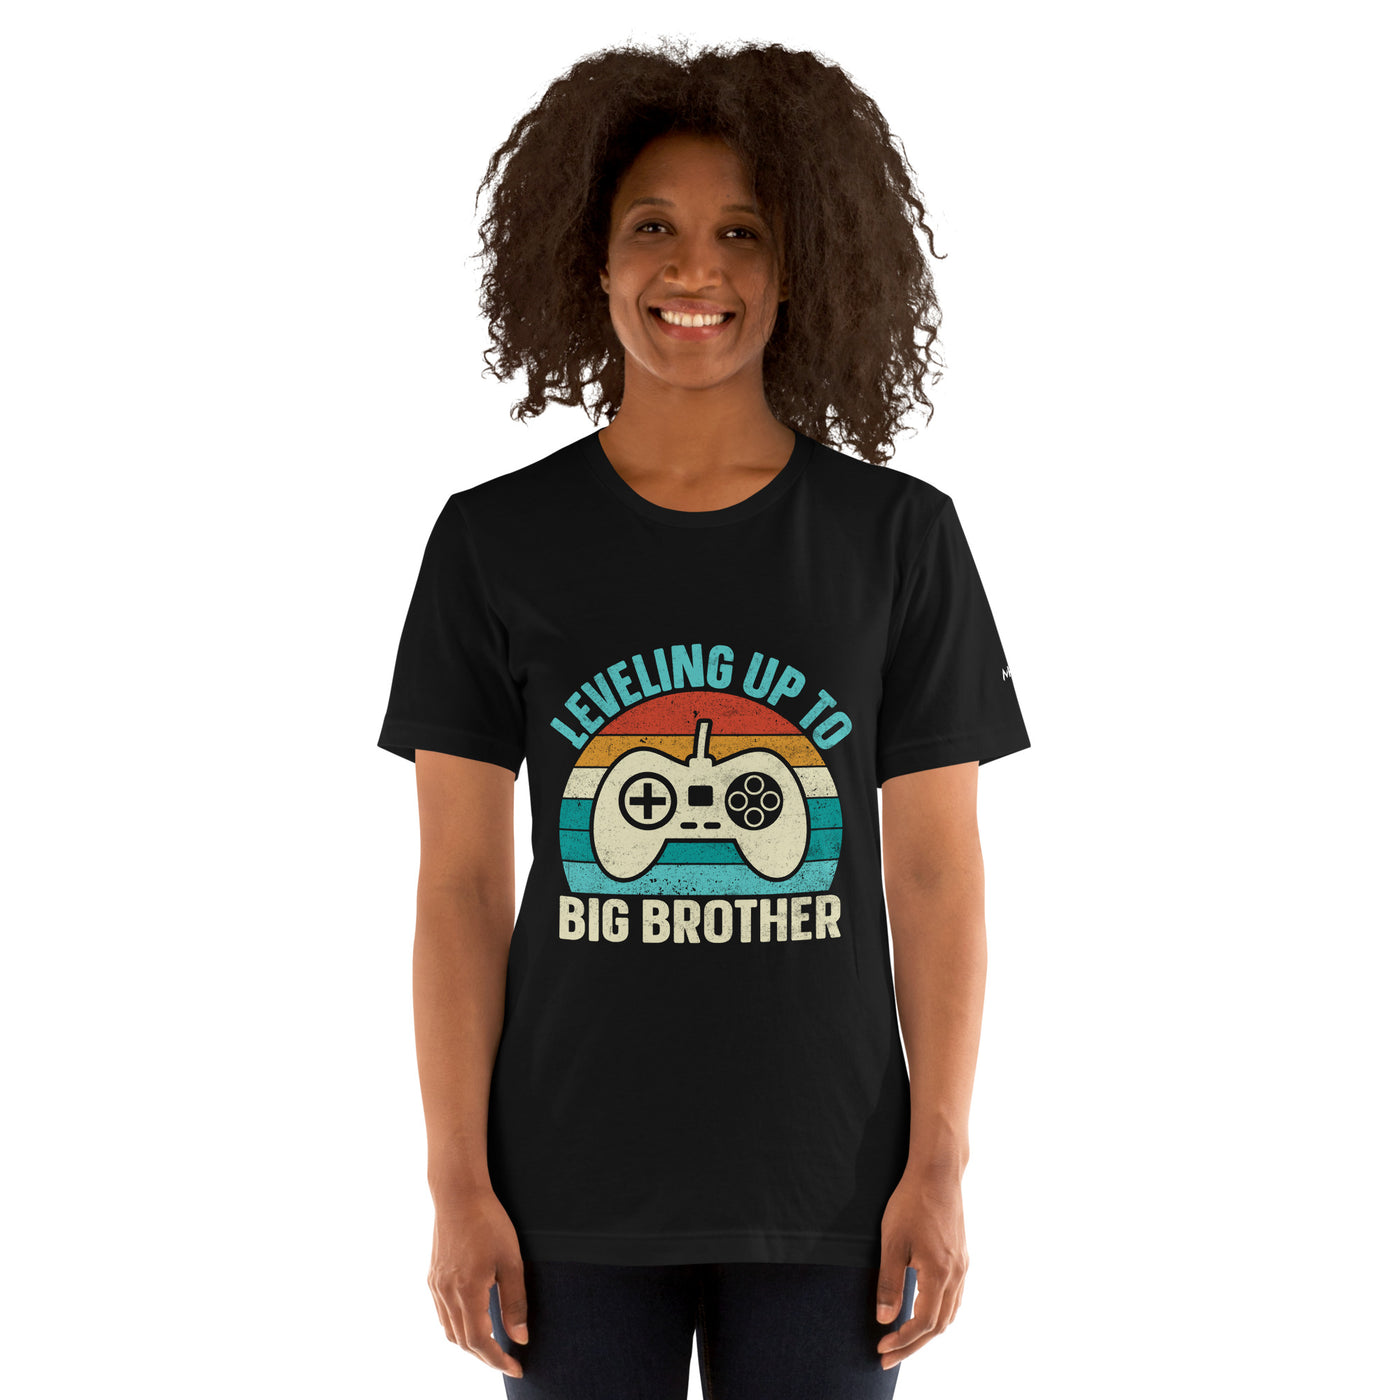 Levelling up to Big Brother V2 - T-Shirt